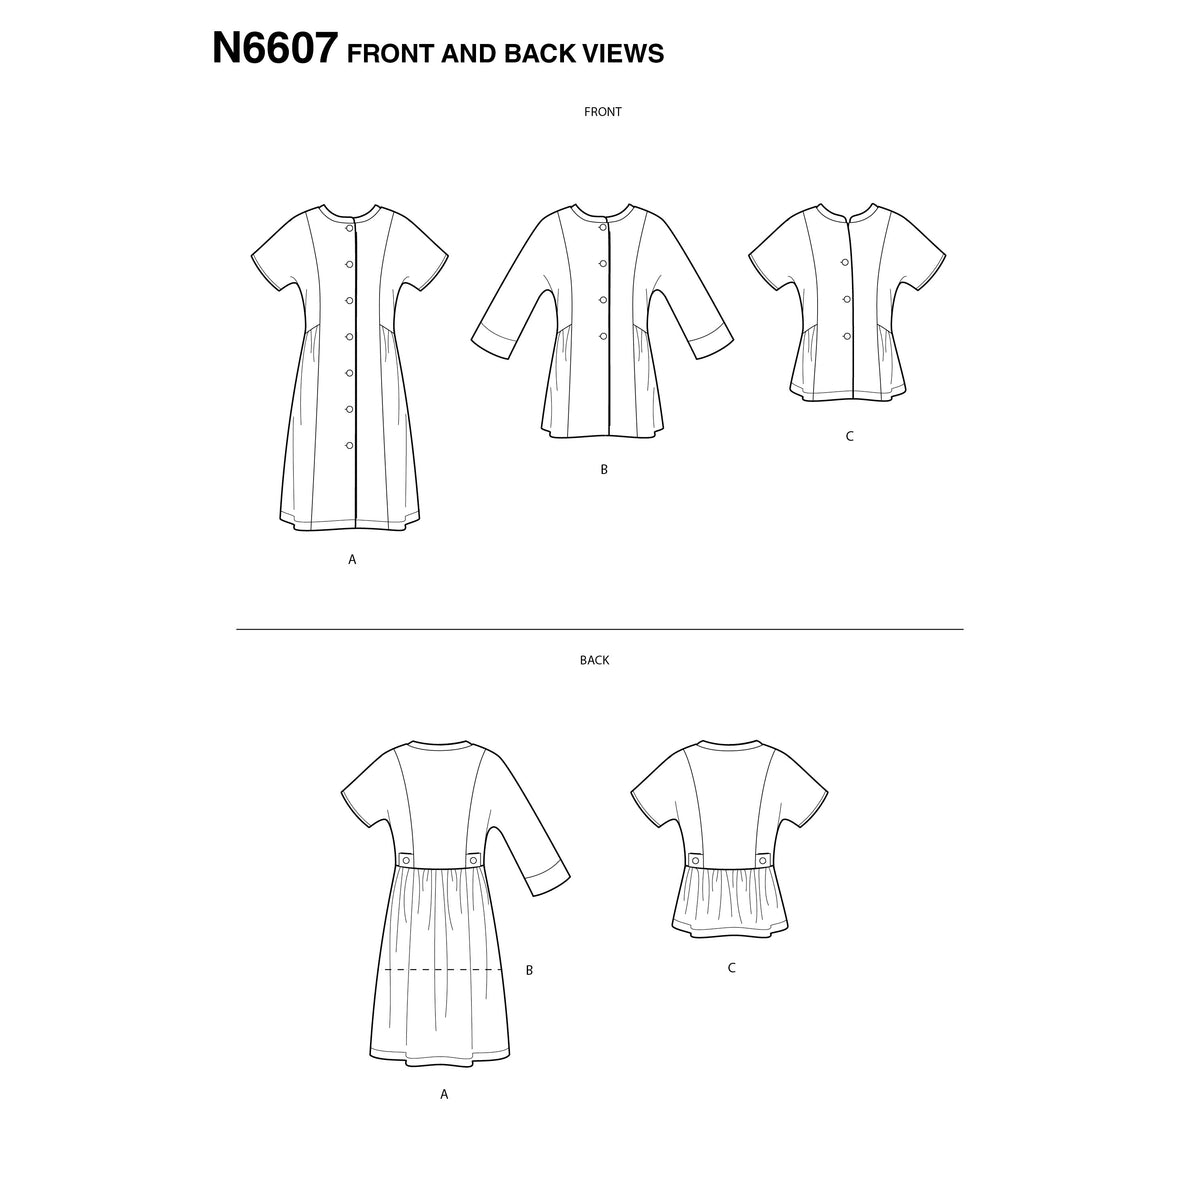 6607 New Look Sewing Pattern N6607 Misses' Mini Dress , Tunic and Top